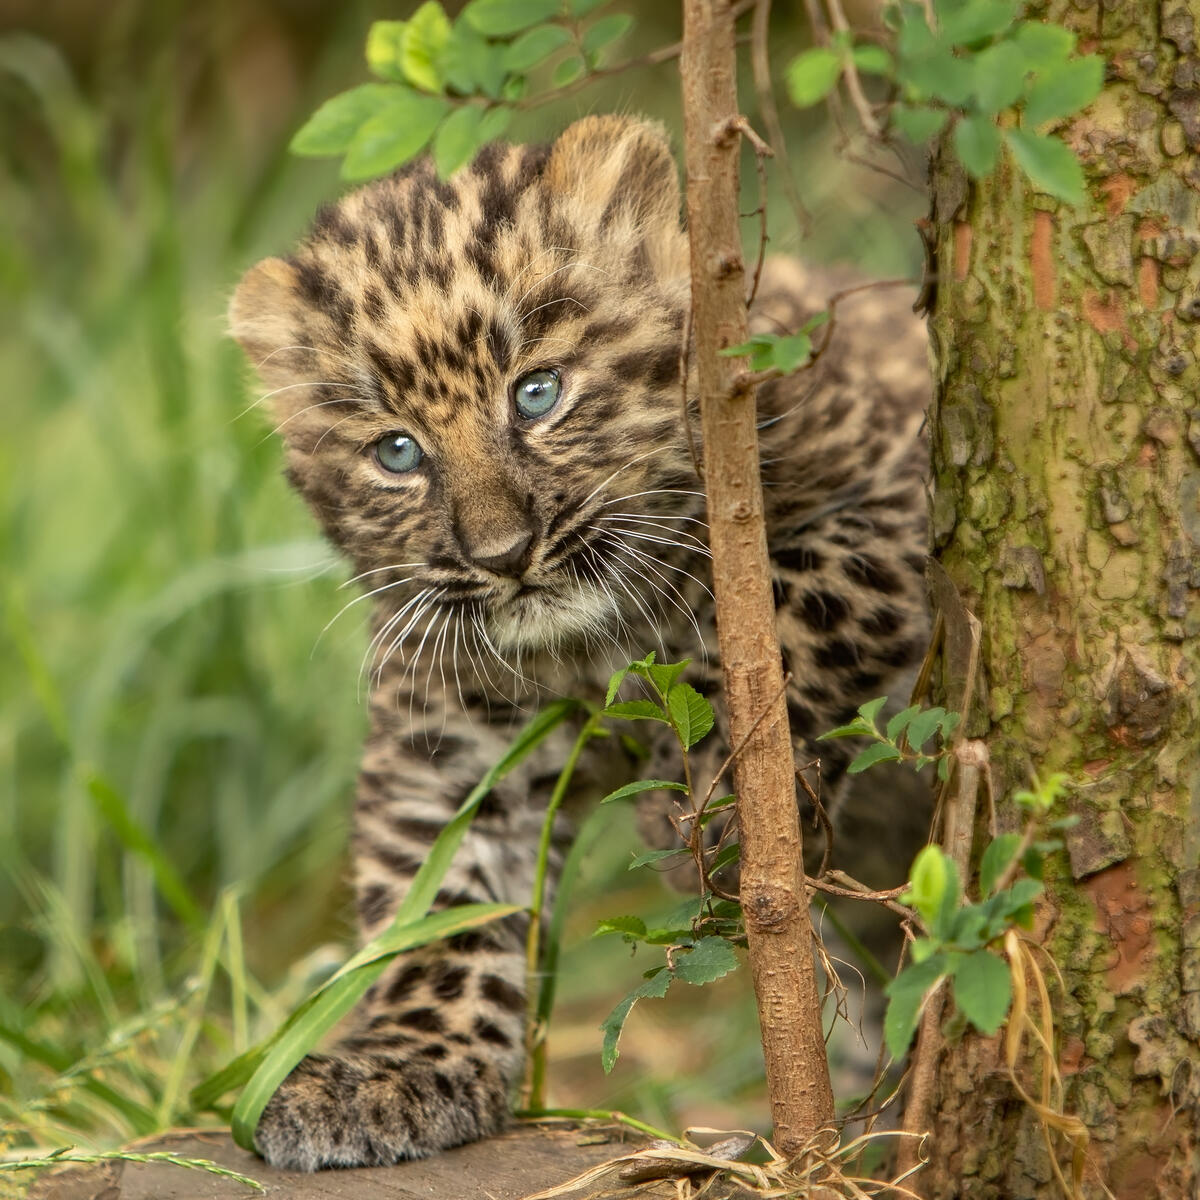 Spotted leopard